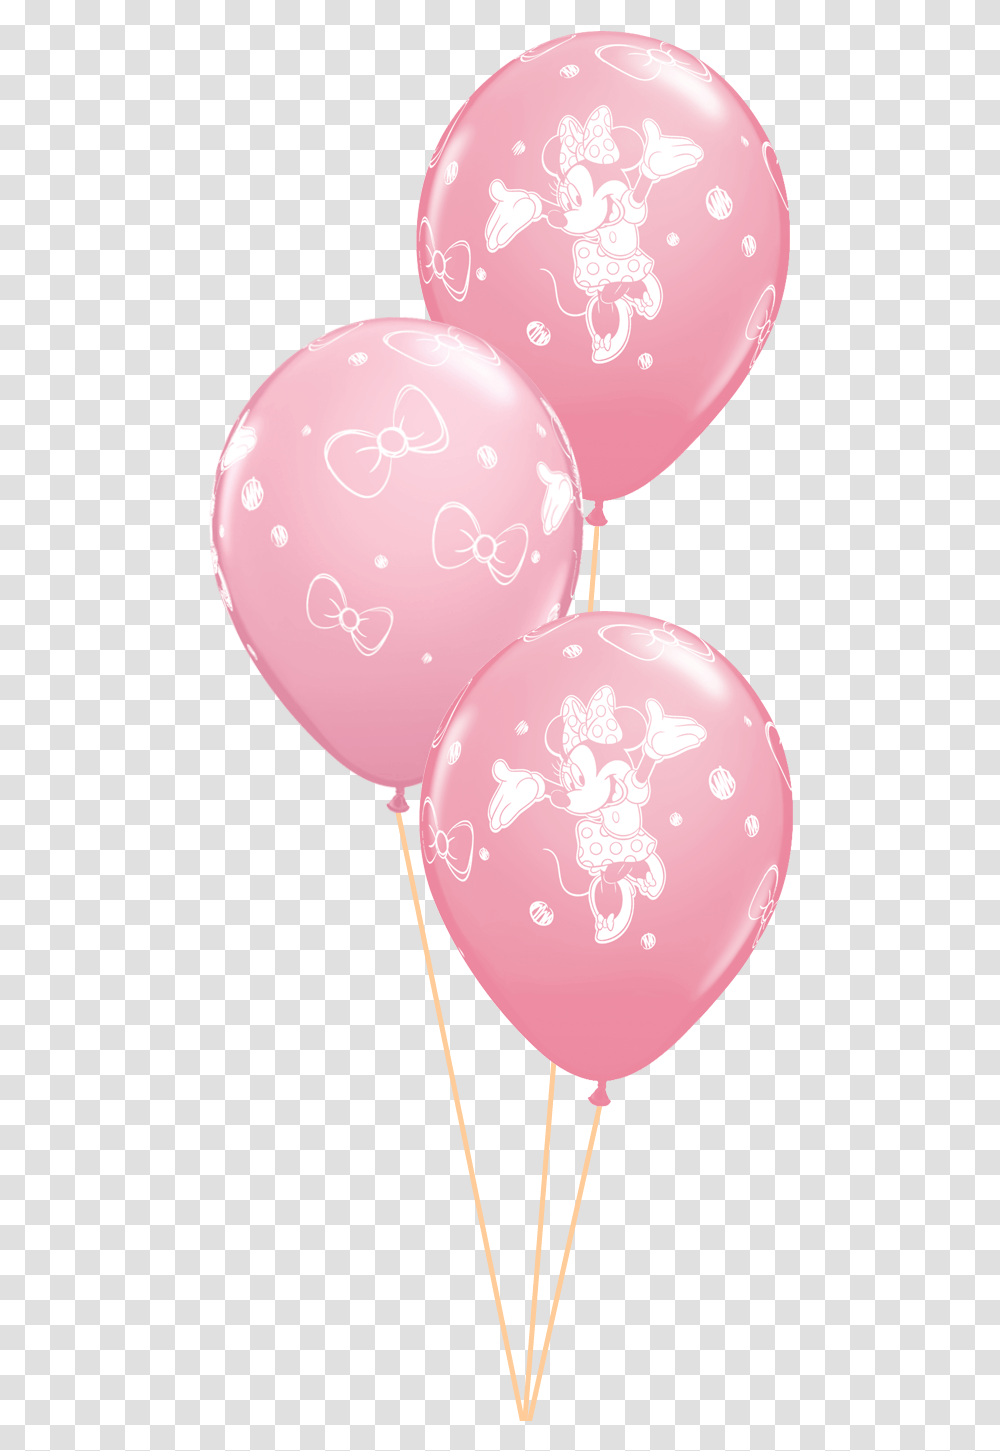 Download Pink Minnie Mouse Balloons Hd Uokplrs Minnie Mouse Birthday Balloons Transparent Png